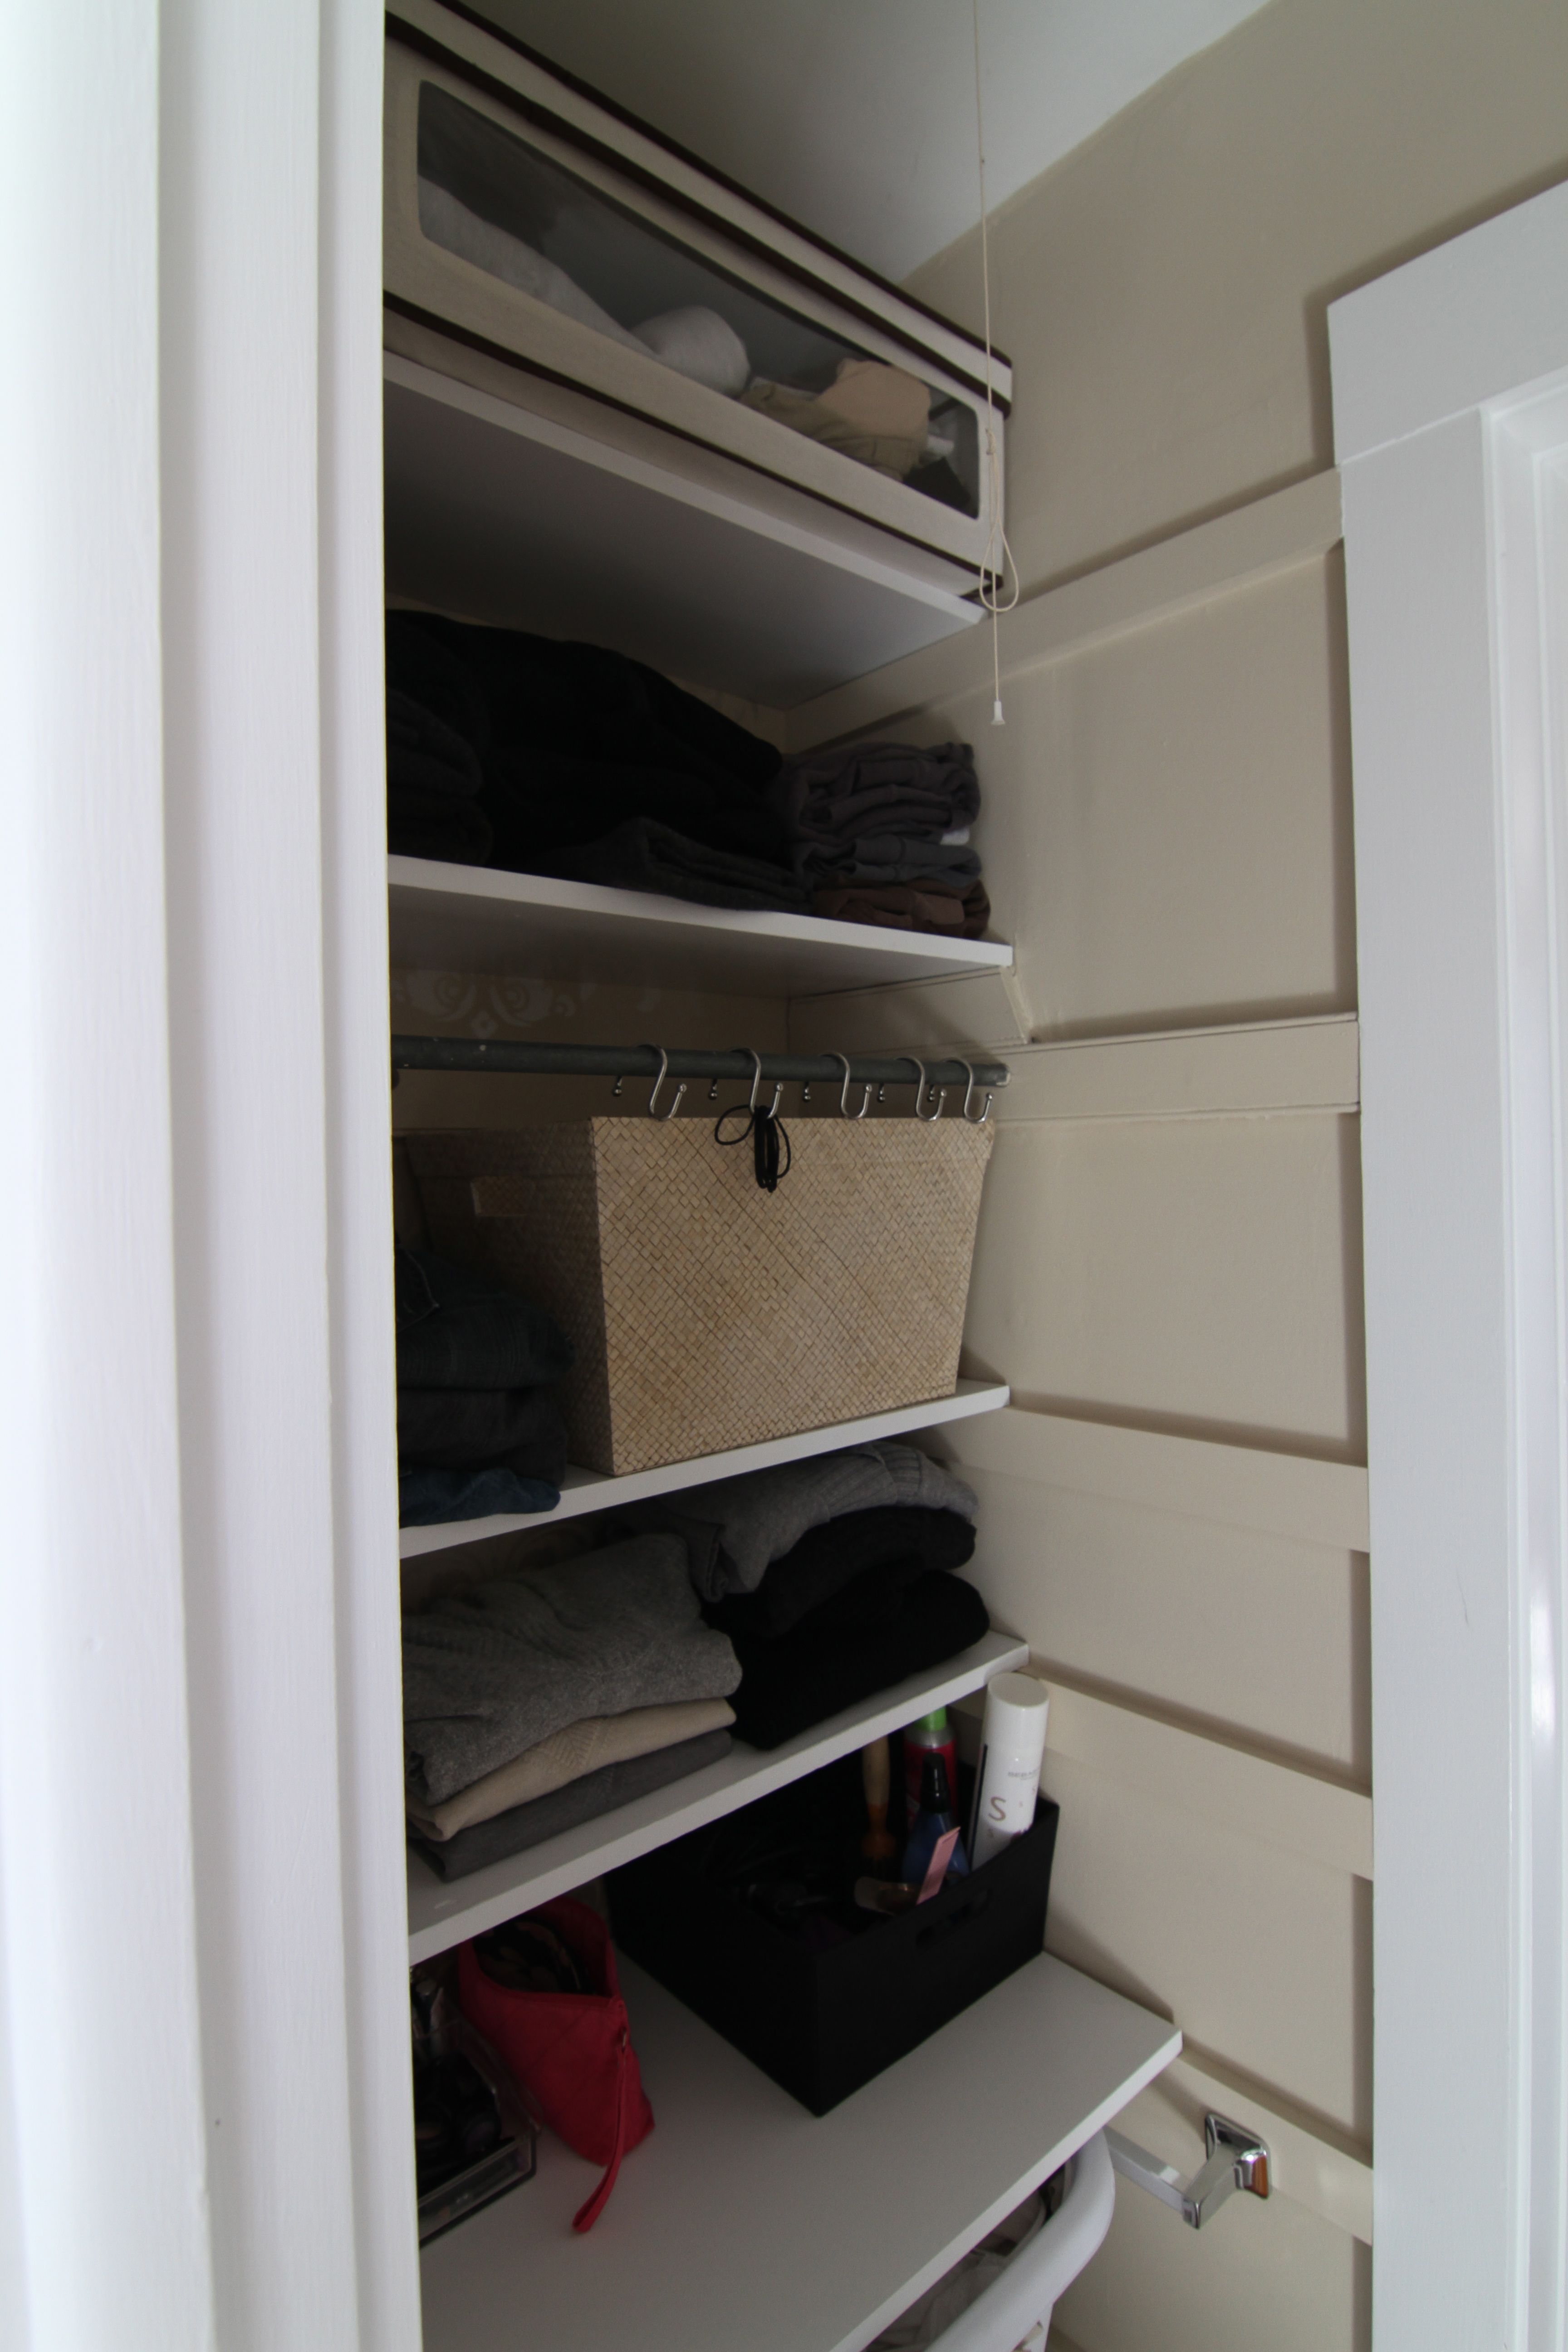 AFTER: The original skirt boards and the new ones seem to blend well enough, but since none of the shelves are affixed this closet can go back to hanging storage as the need arises.